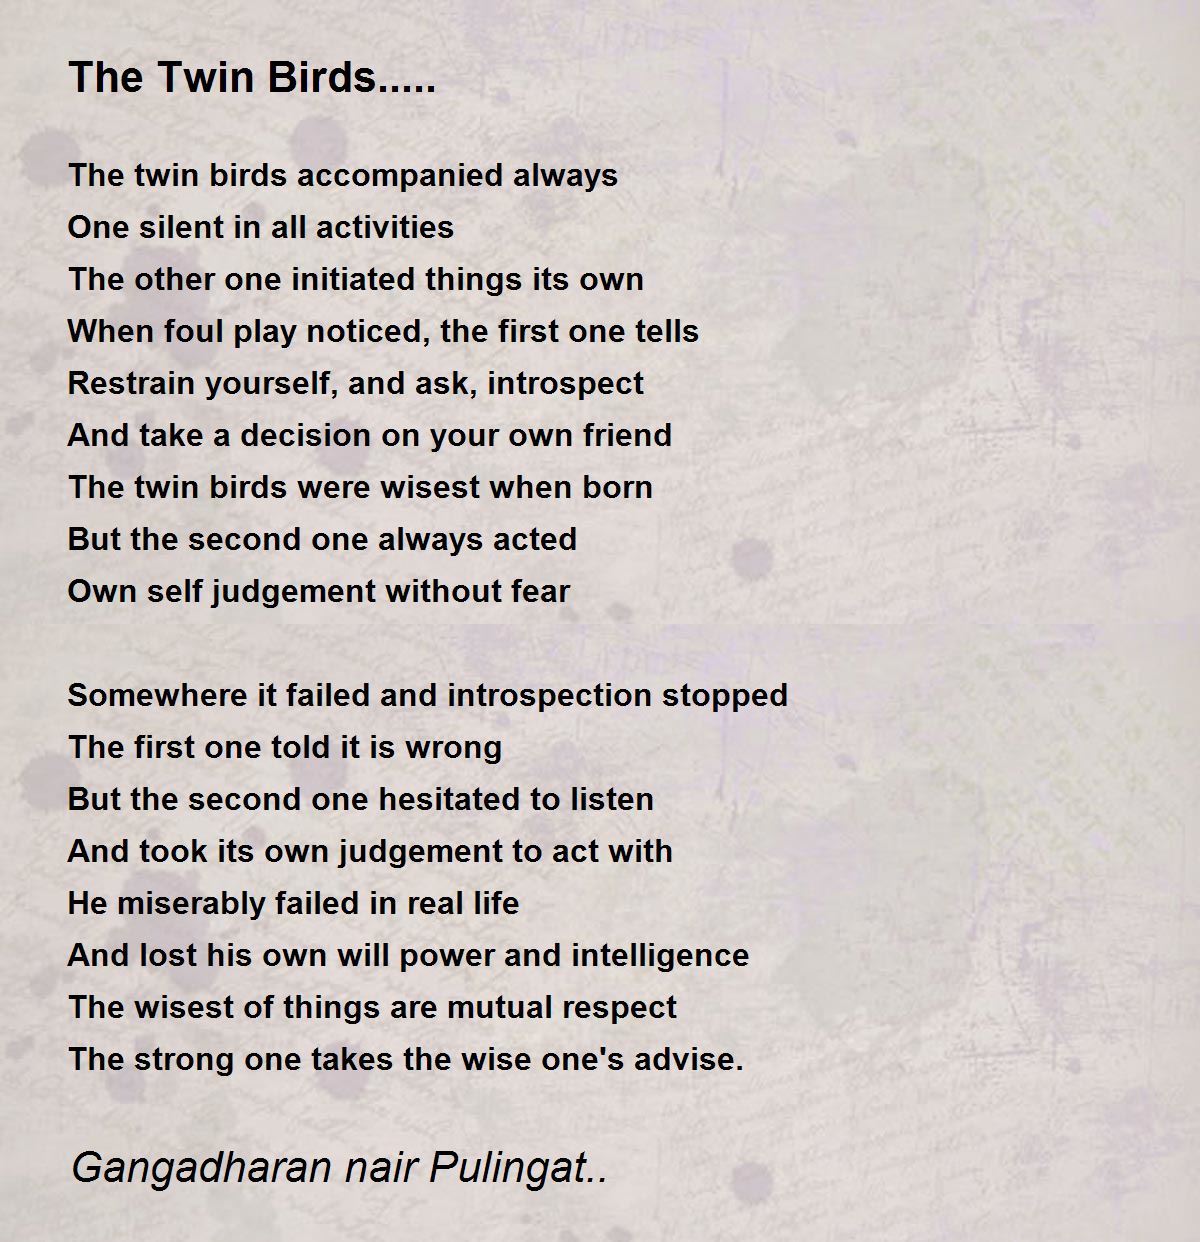 https://img.poemhunter.com/i/poem_images/871/the-twin-birds.jpg